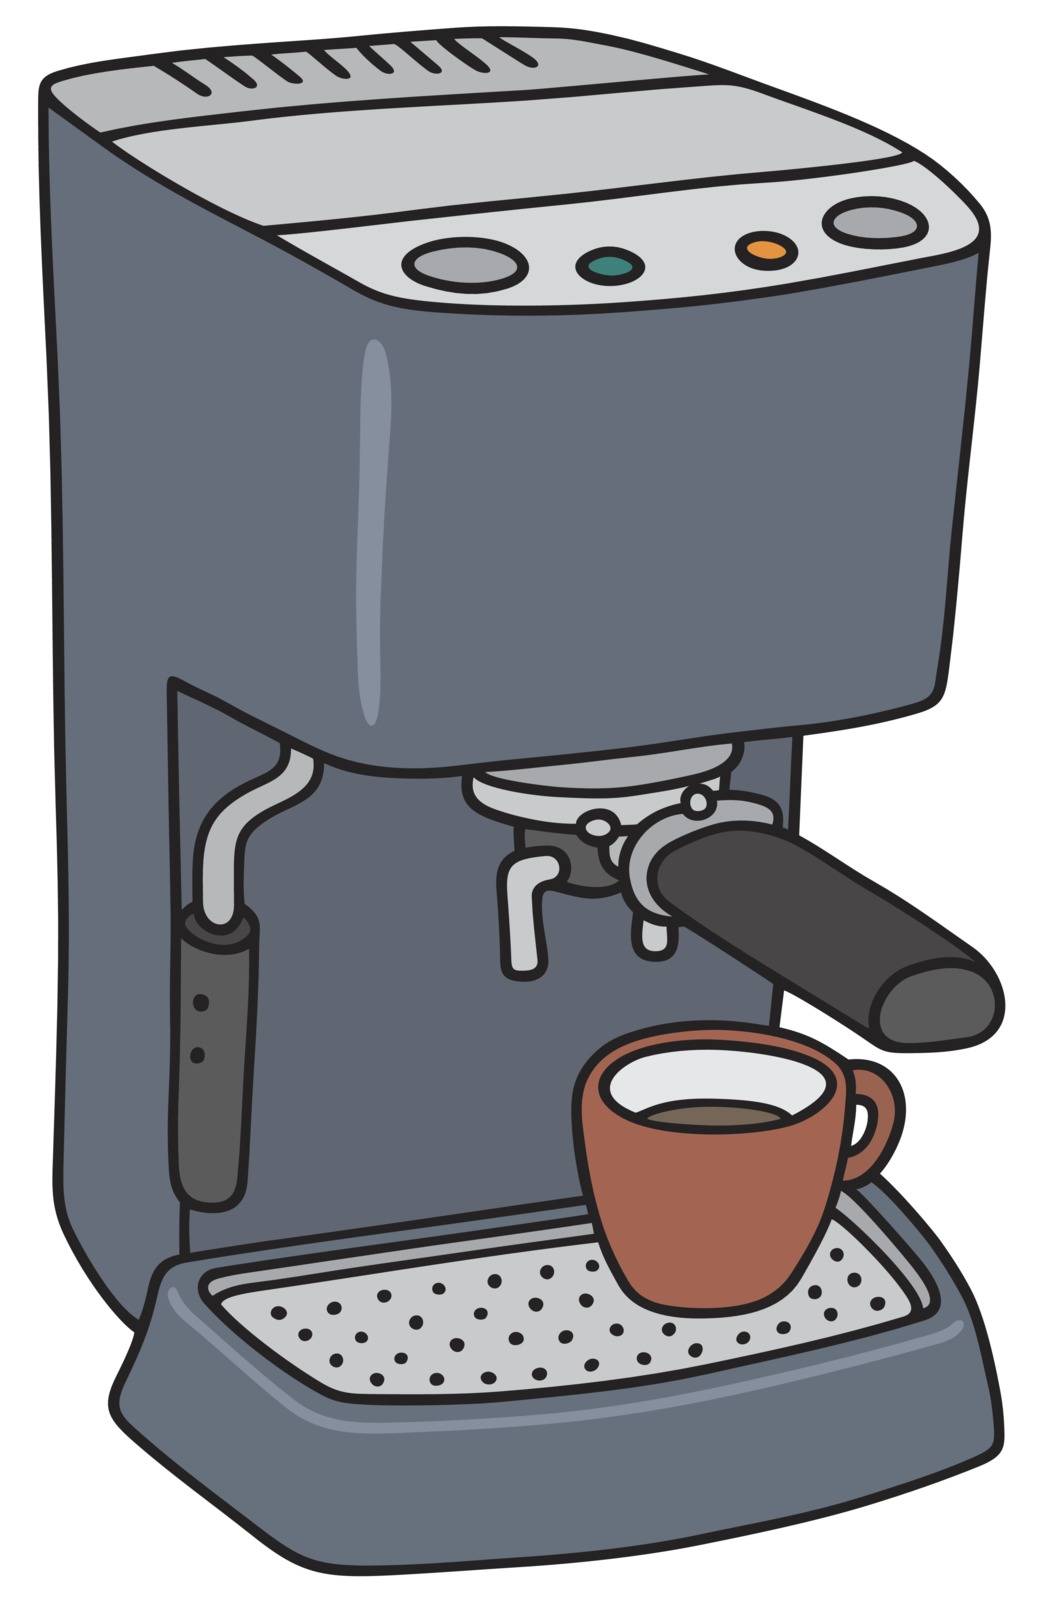 Hand drawing of a blue electric espresso maker - not a real type